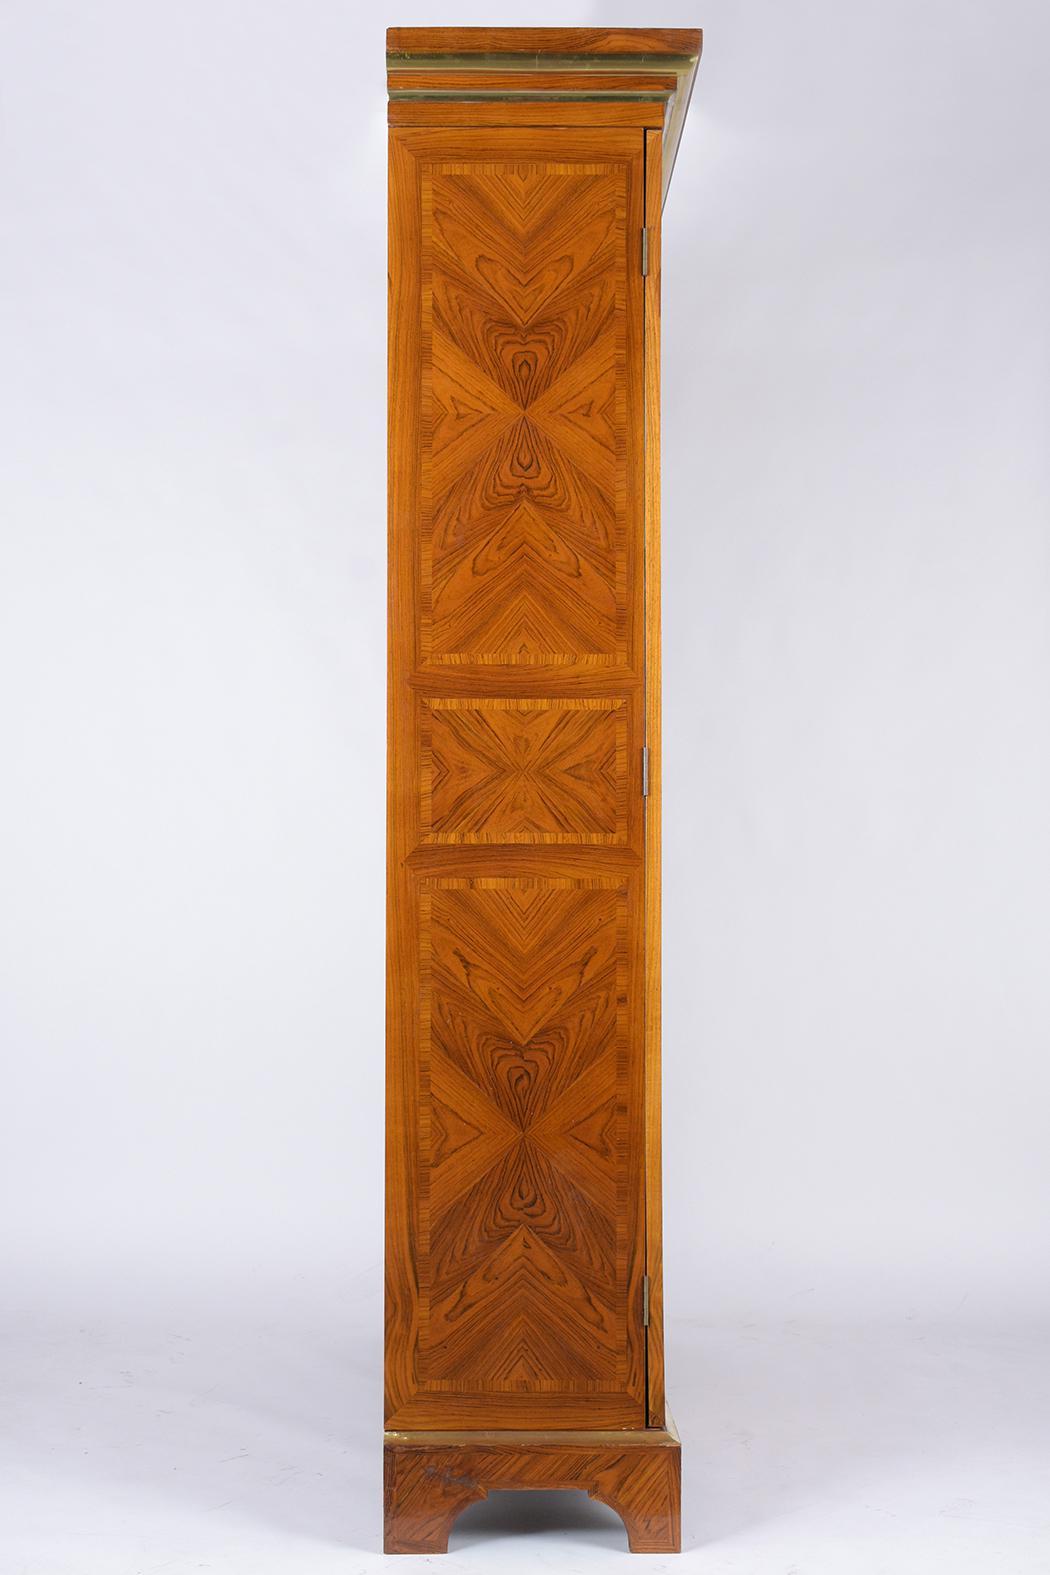 1900s Antique French Louis XVI-Style Walnut Bookcase with Marquetry Panels For Sale 6